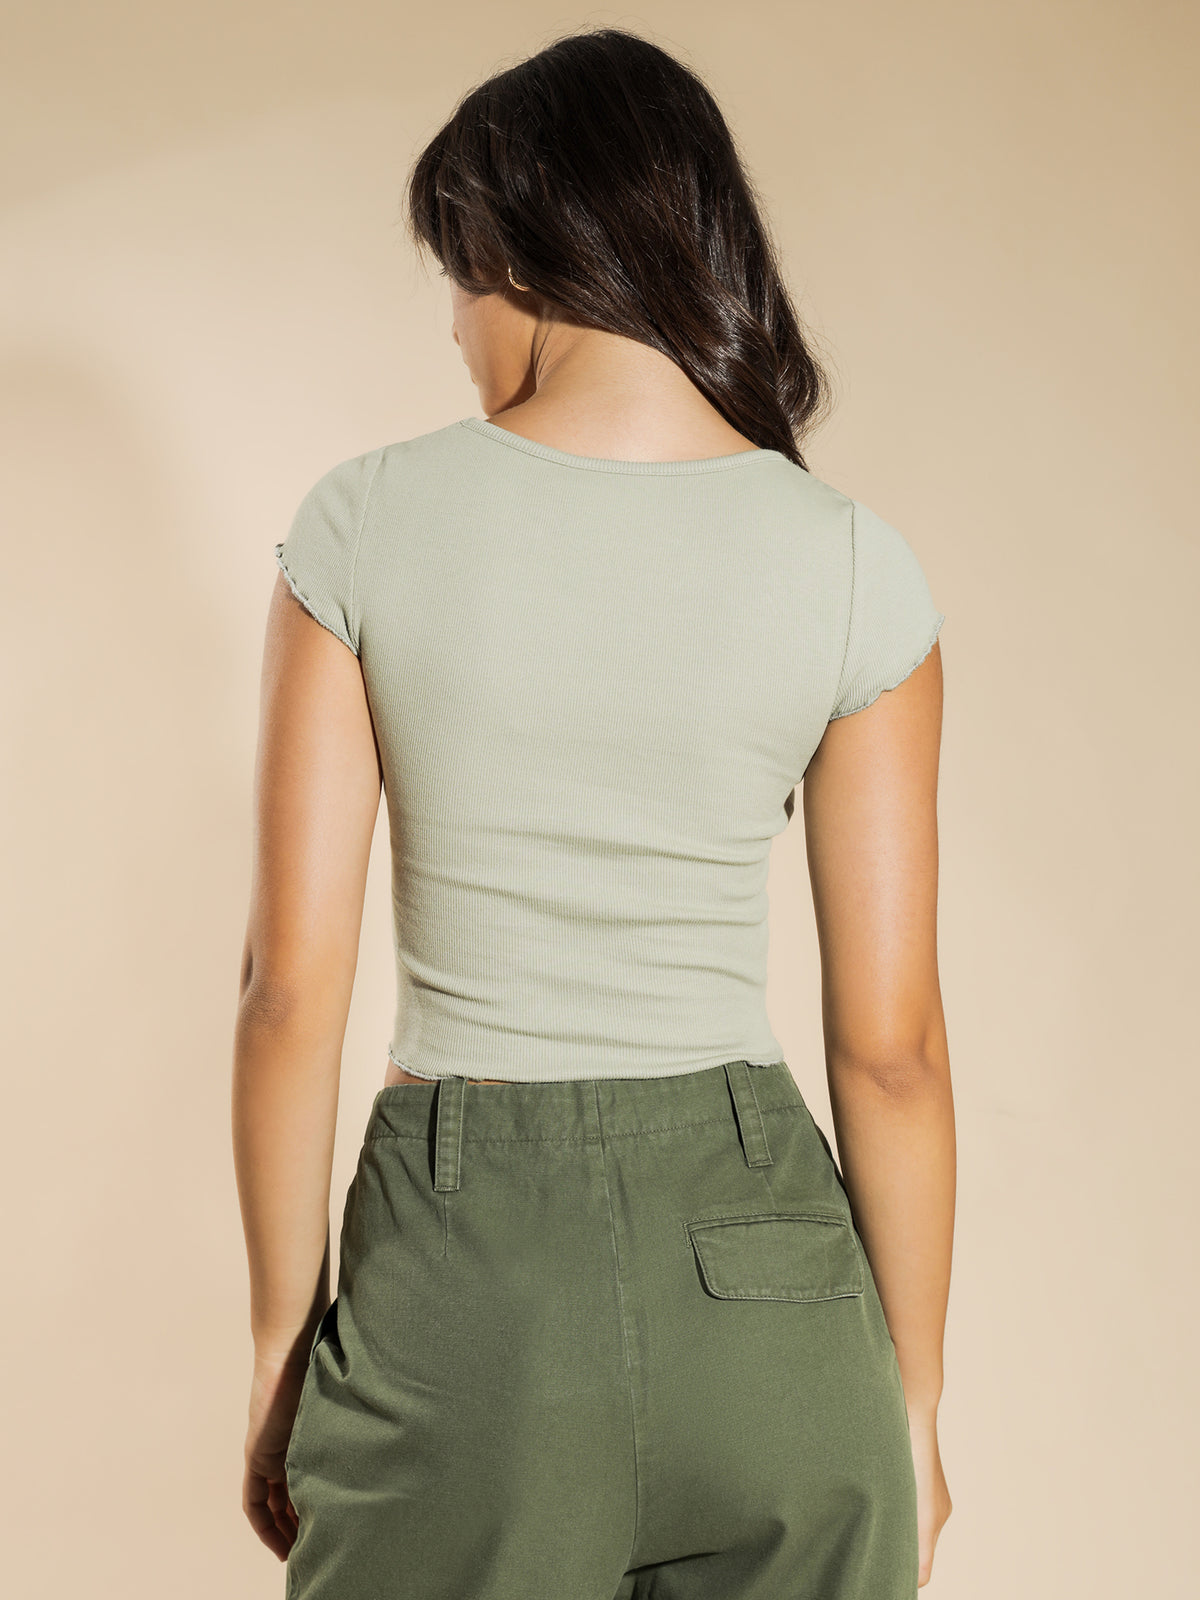 Ruched Front T-Shirt in Mist